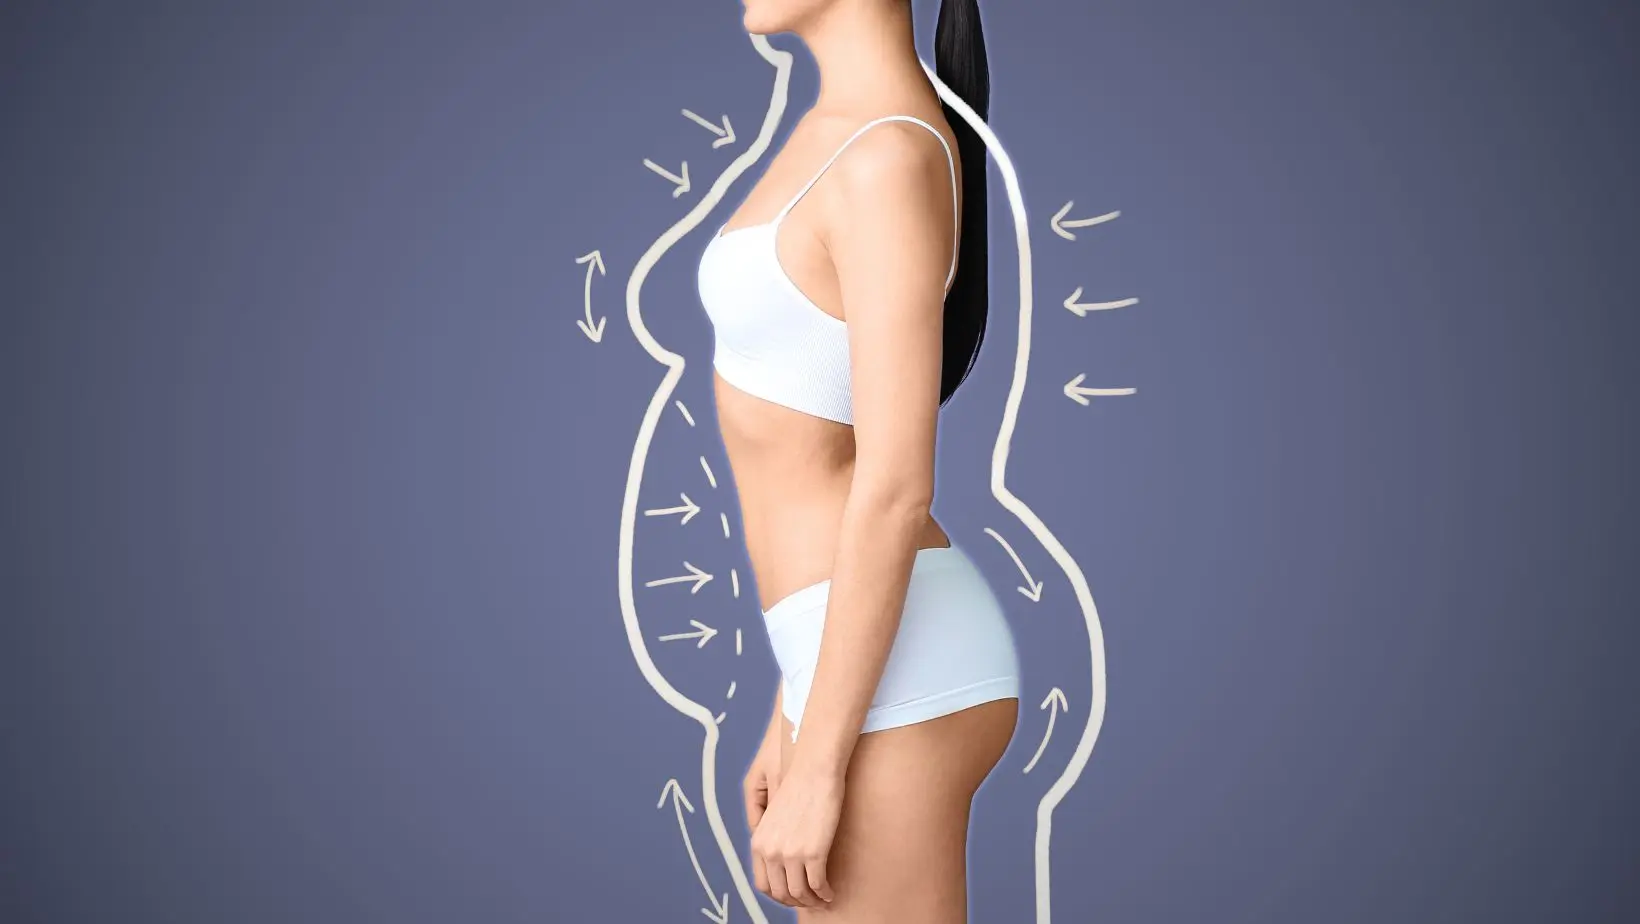 What is Non-Surgical Body Contouring - A Vibrant Guide